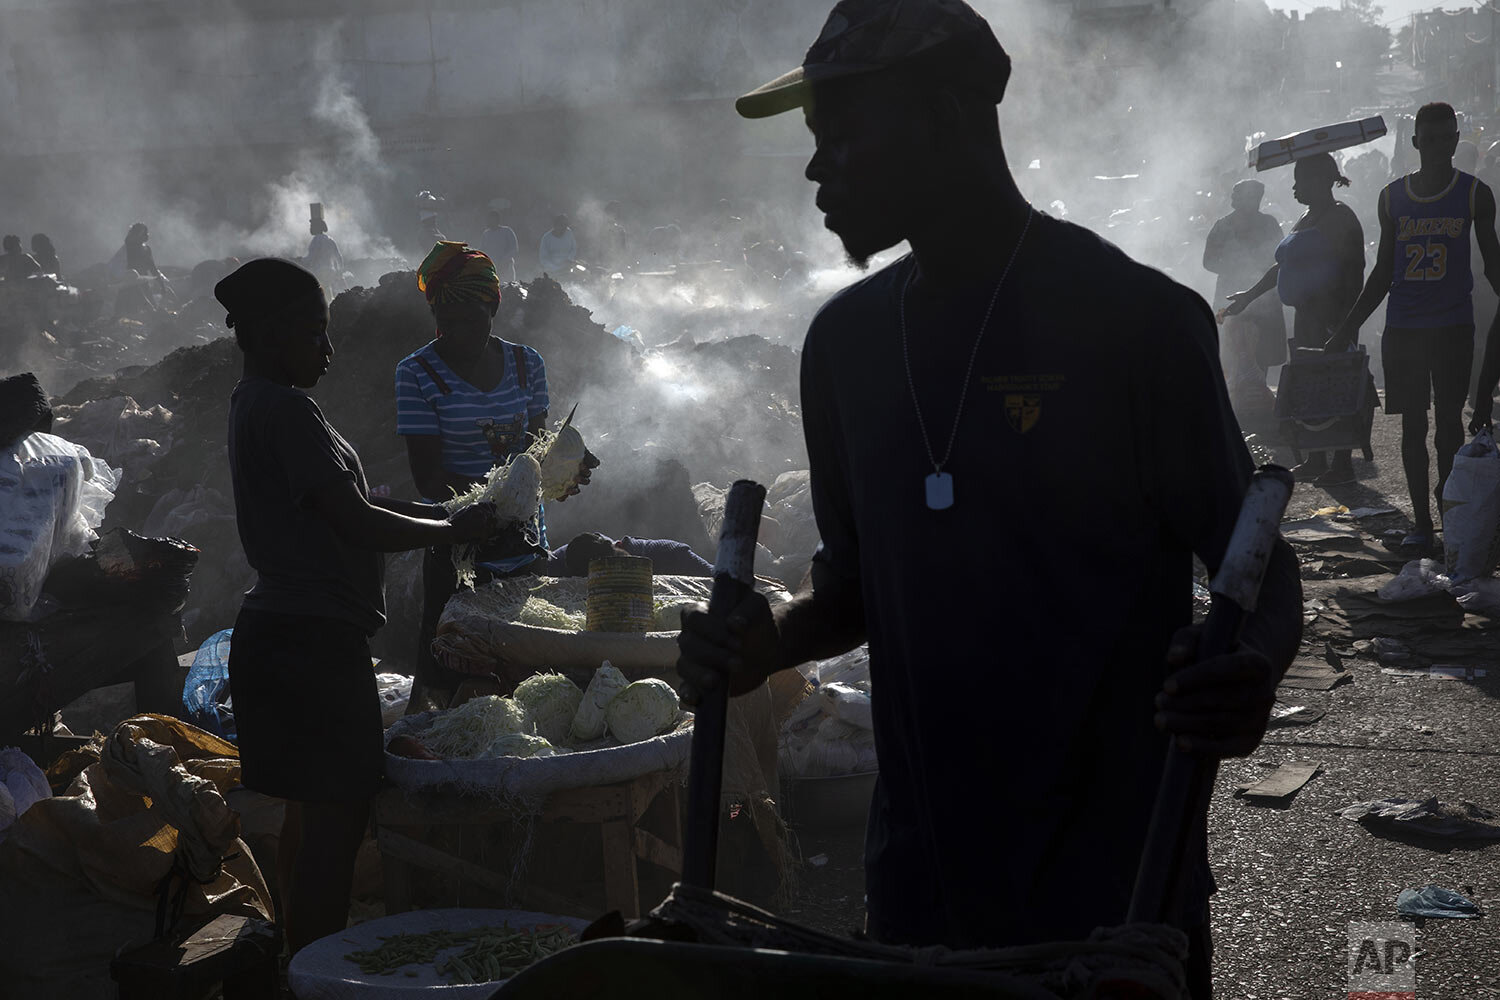  Vendors shred cabbage in the Croix des Bosalles market in Port-au-Prince, Haiti, Sept. 13, 2021. The city's main food market extends from the port to parliament, where enslaved people were sold before Haiti’s independence. (AP Photo/Rodrigo Abd) 